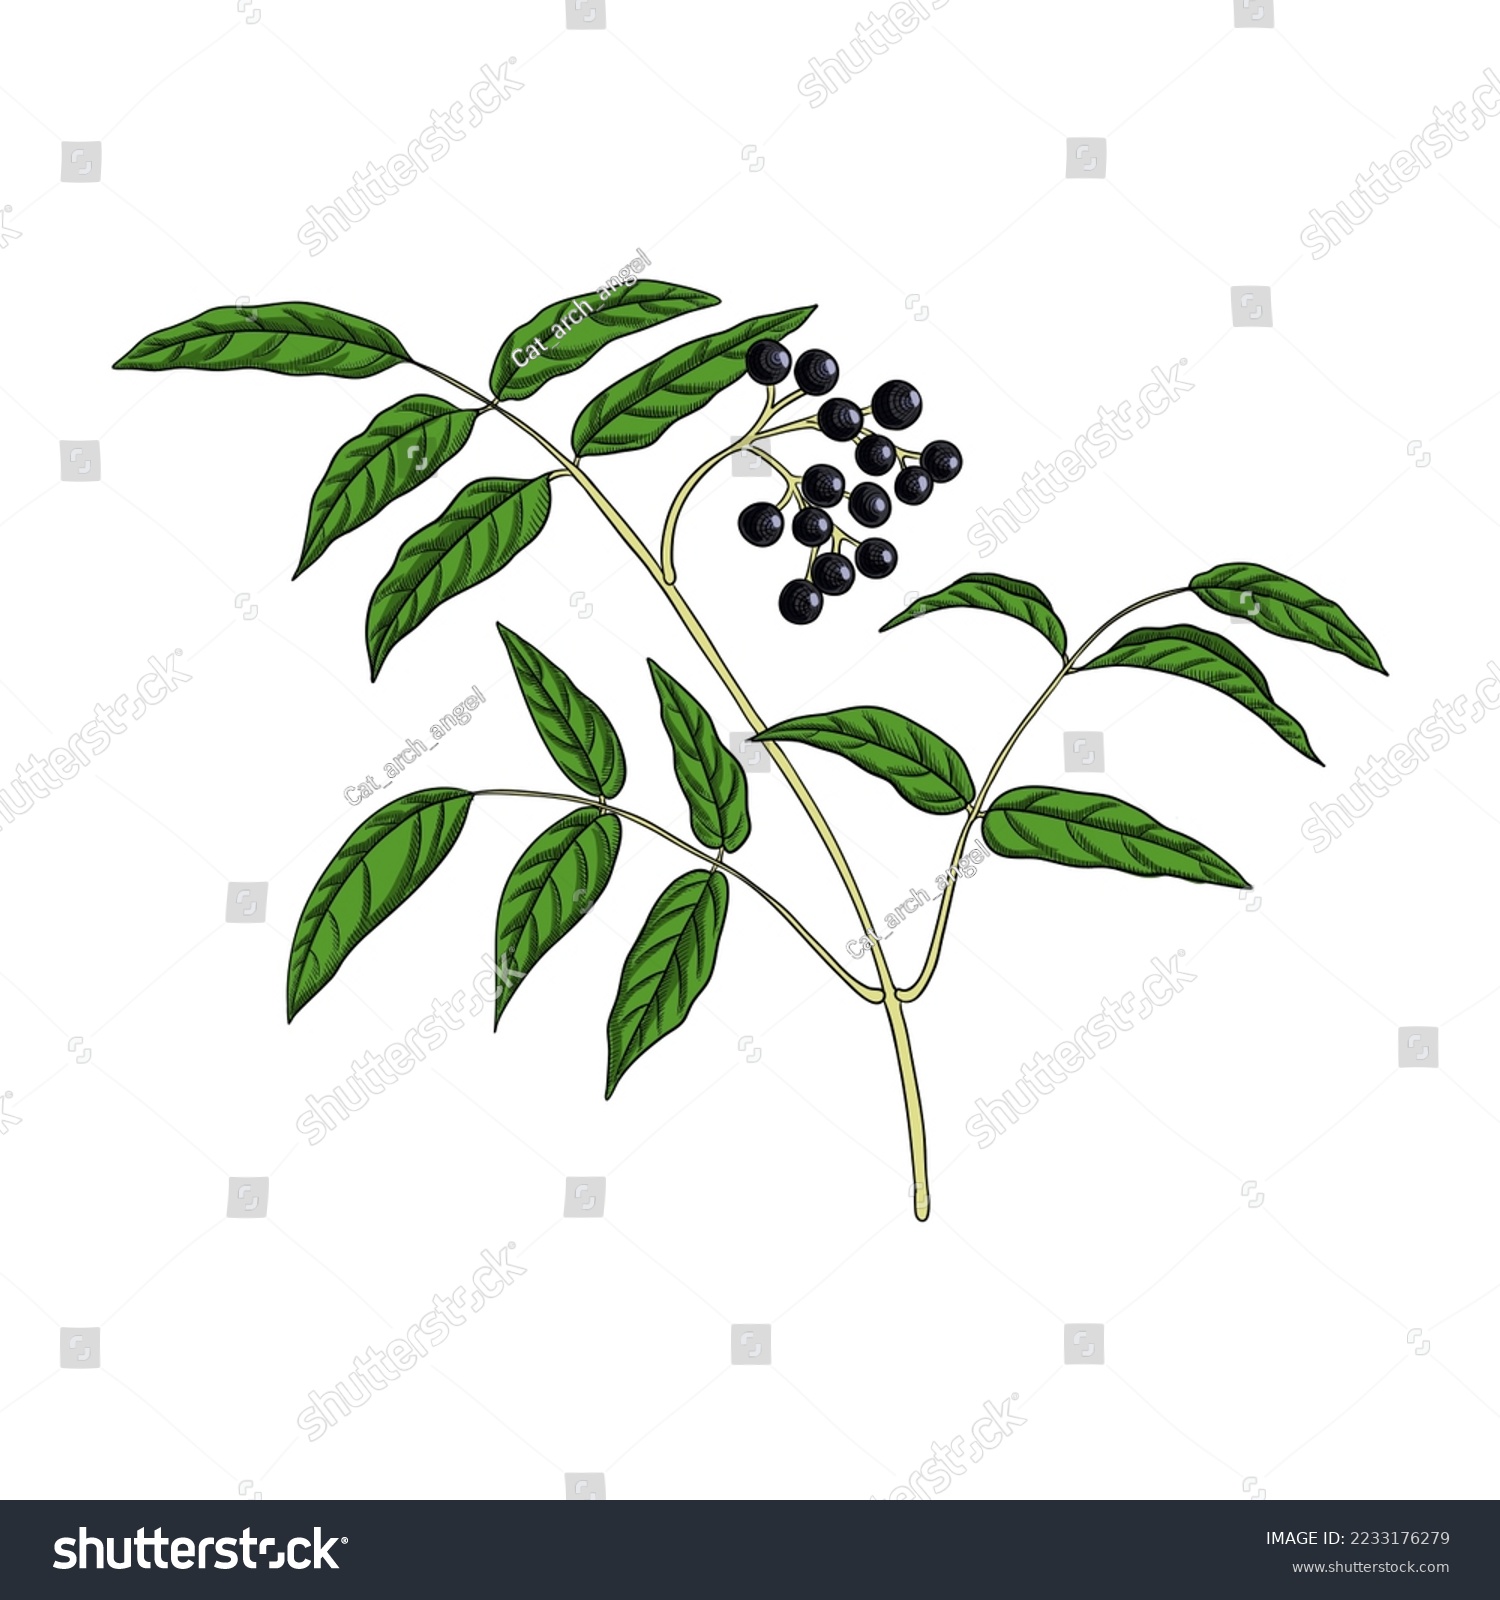 SVG of vector drawing branch of Amur cork tree with leaves and berries, Phellodendron amurense, herb of traditional chinese medicine, hand drawn illustration svg